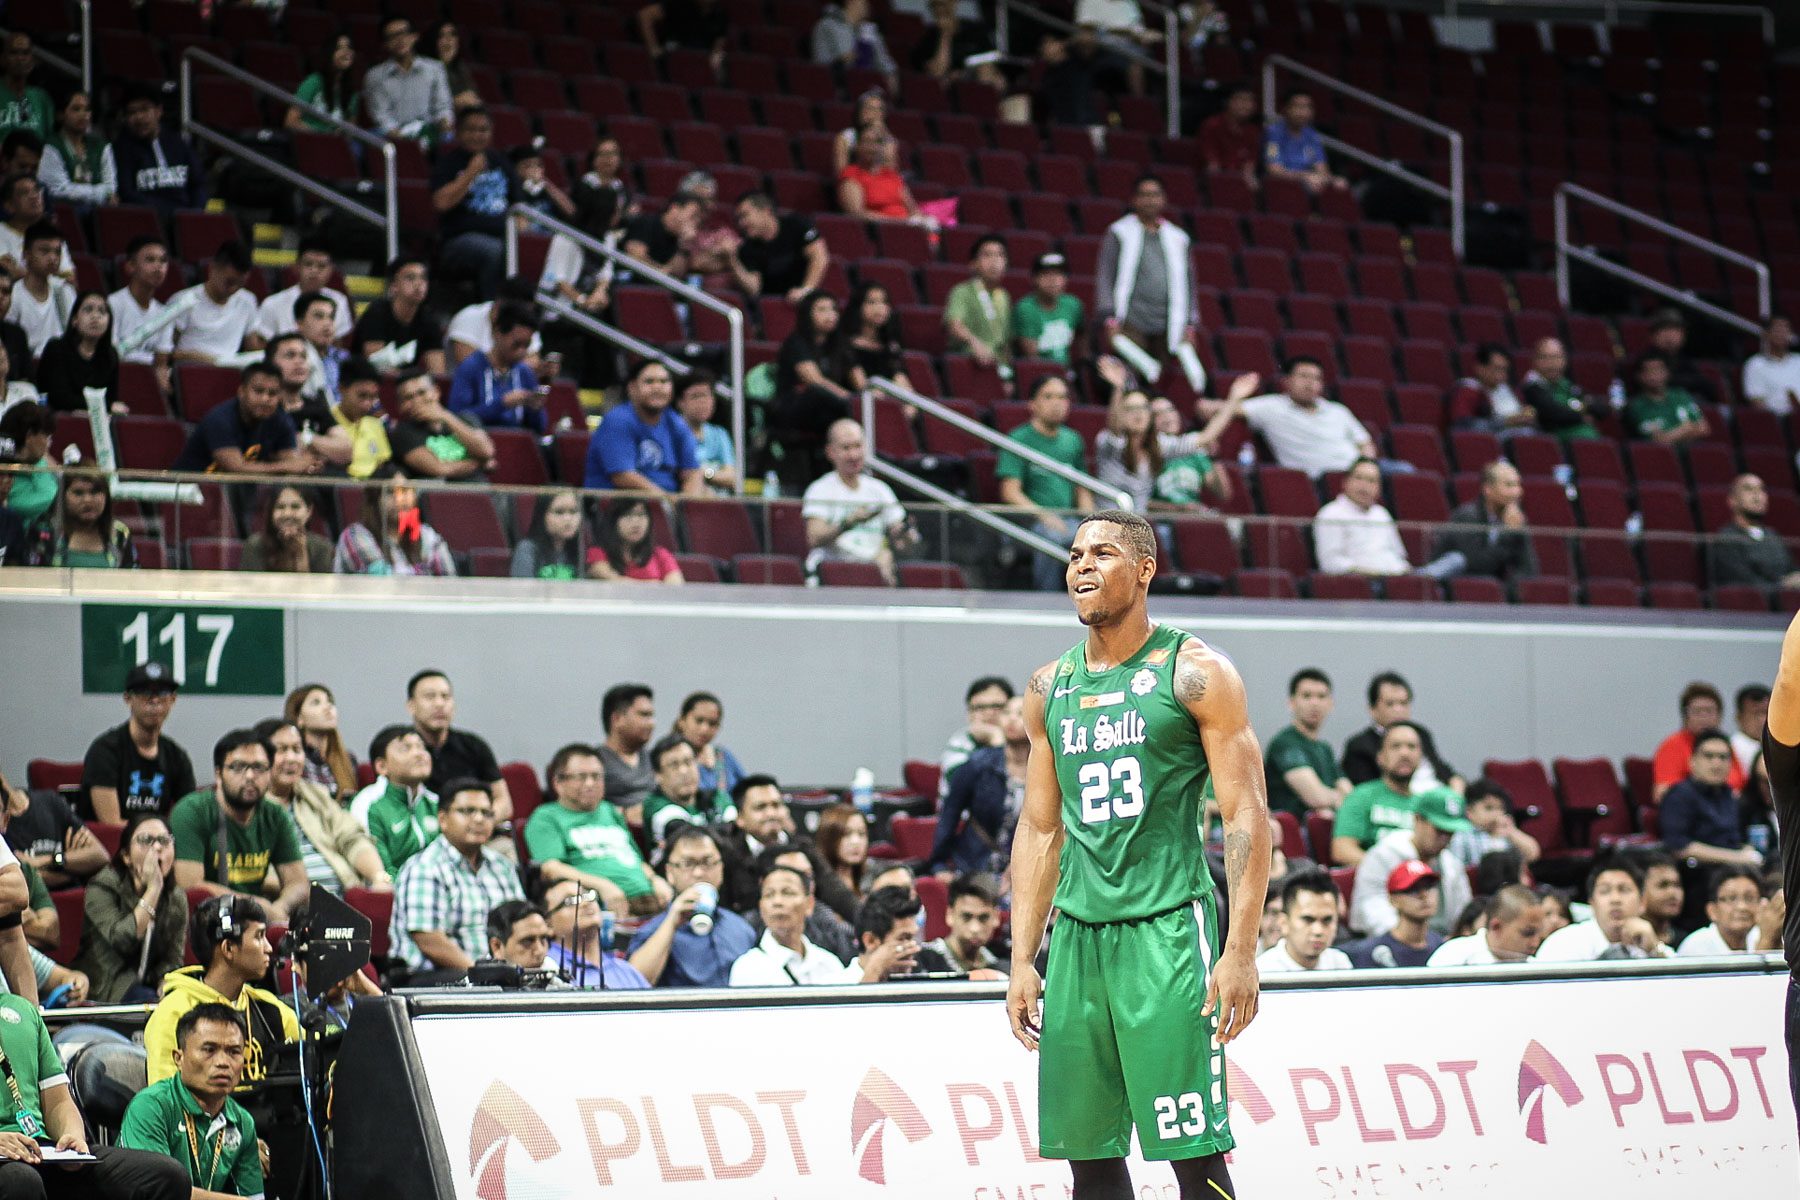 La Salle’s Mbala leads UAAP MVP race after first round